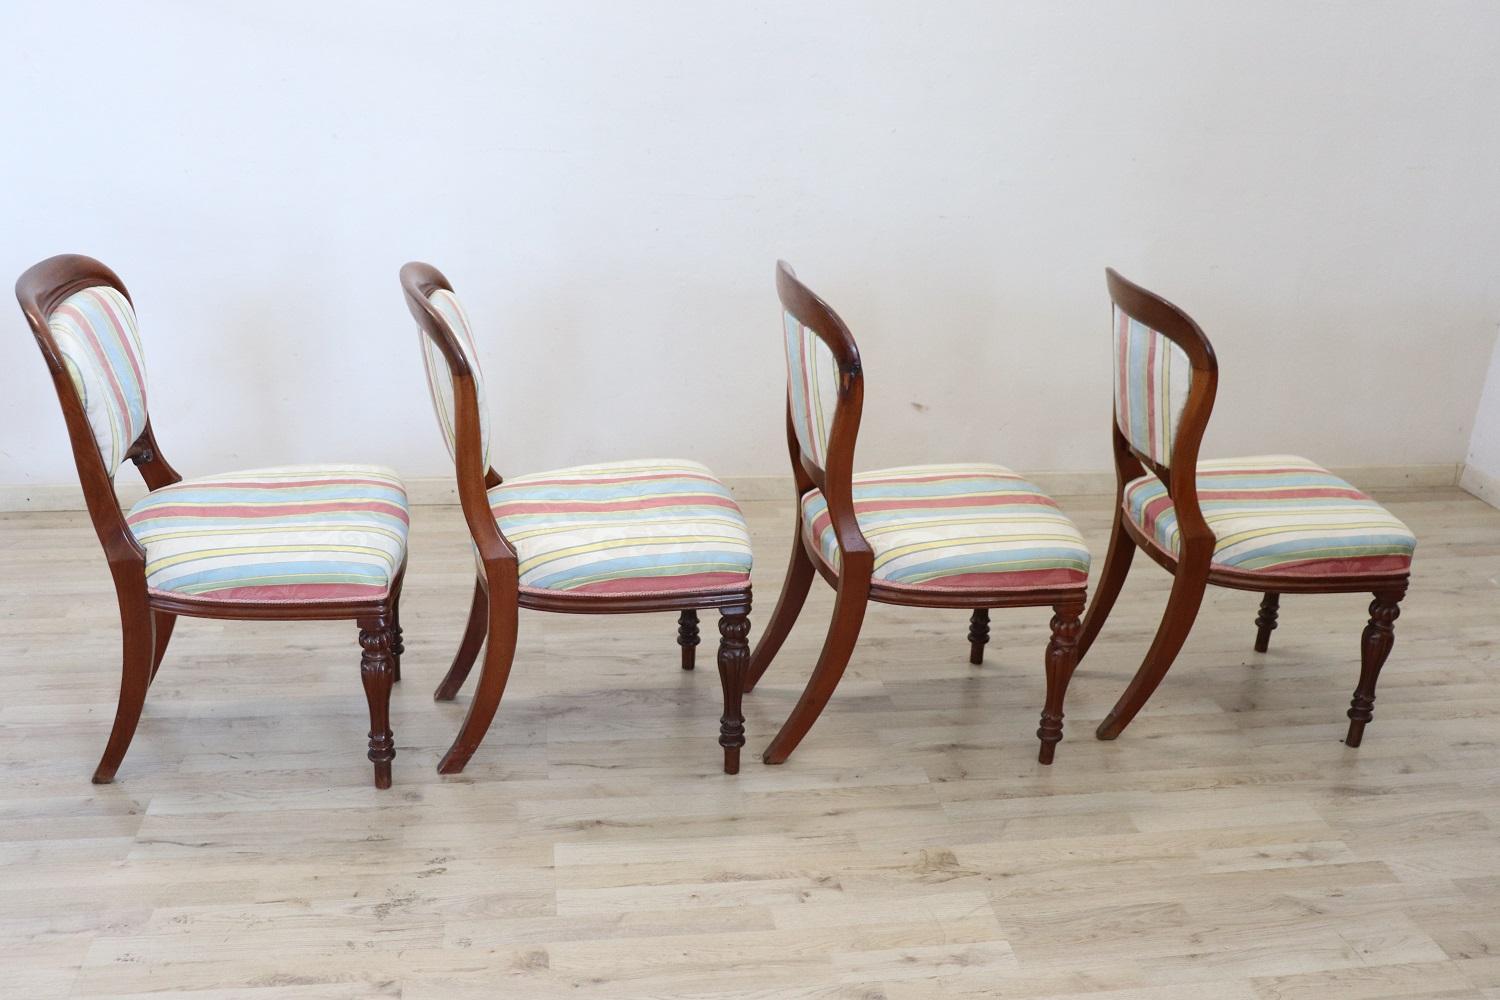 Early 19th Century English Victorian Carved Mahogany Set of Four Antique Chairs For Sale 4